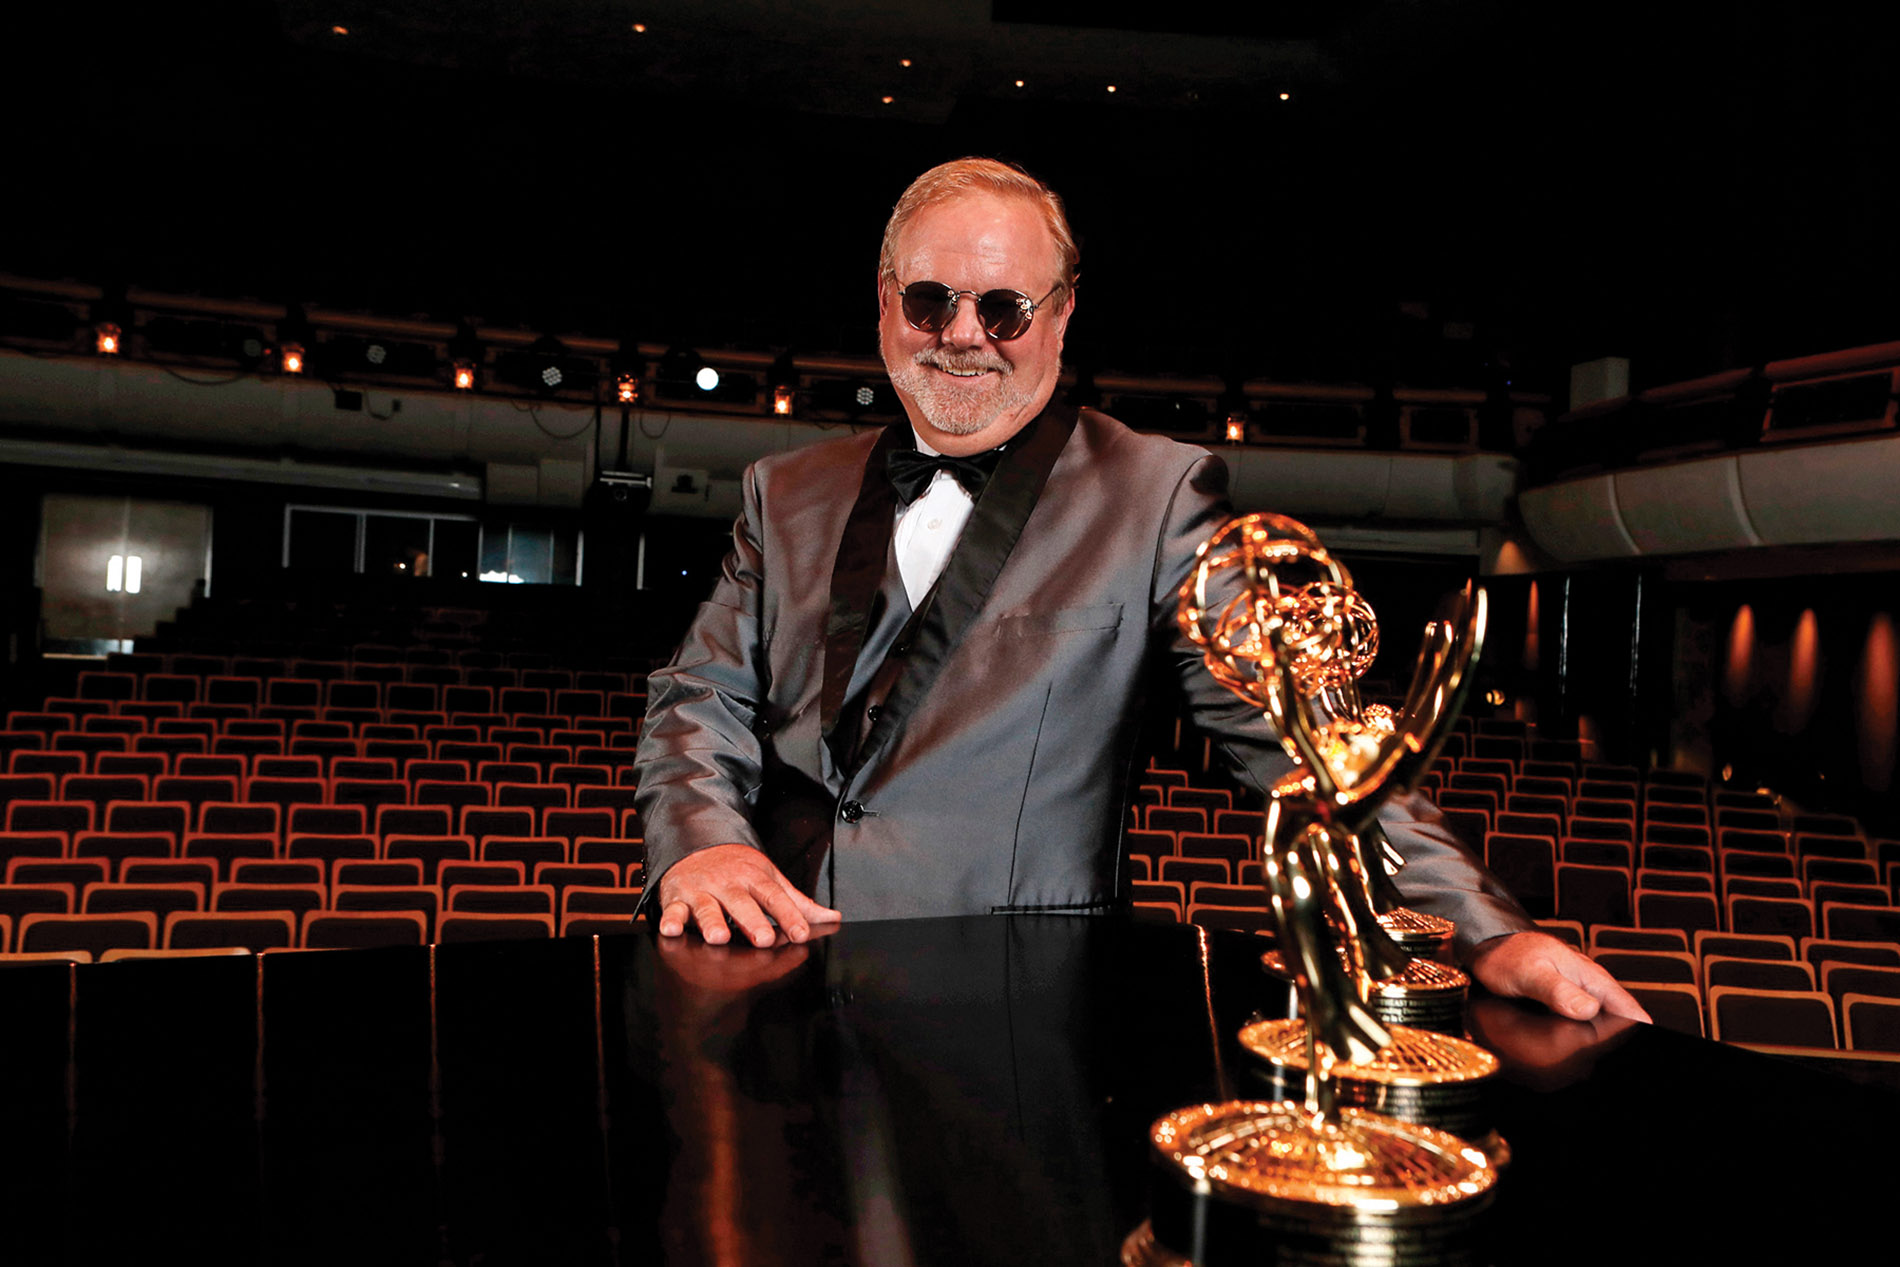 Image of Art Berger with grammys